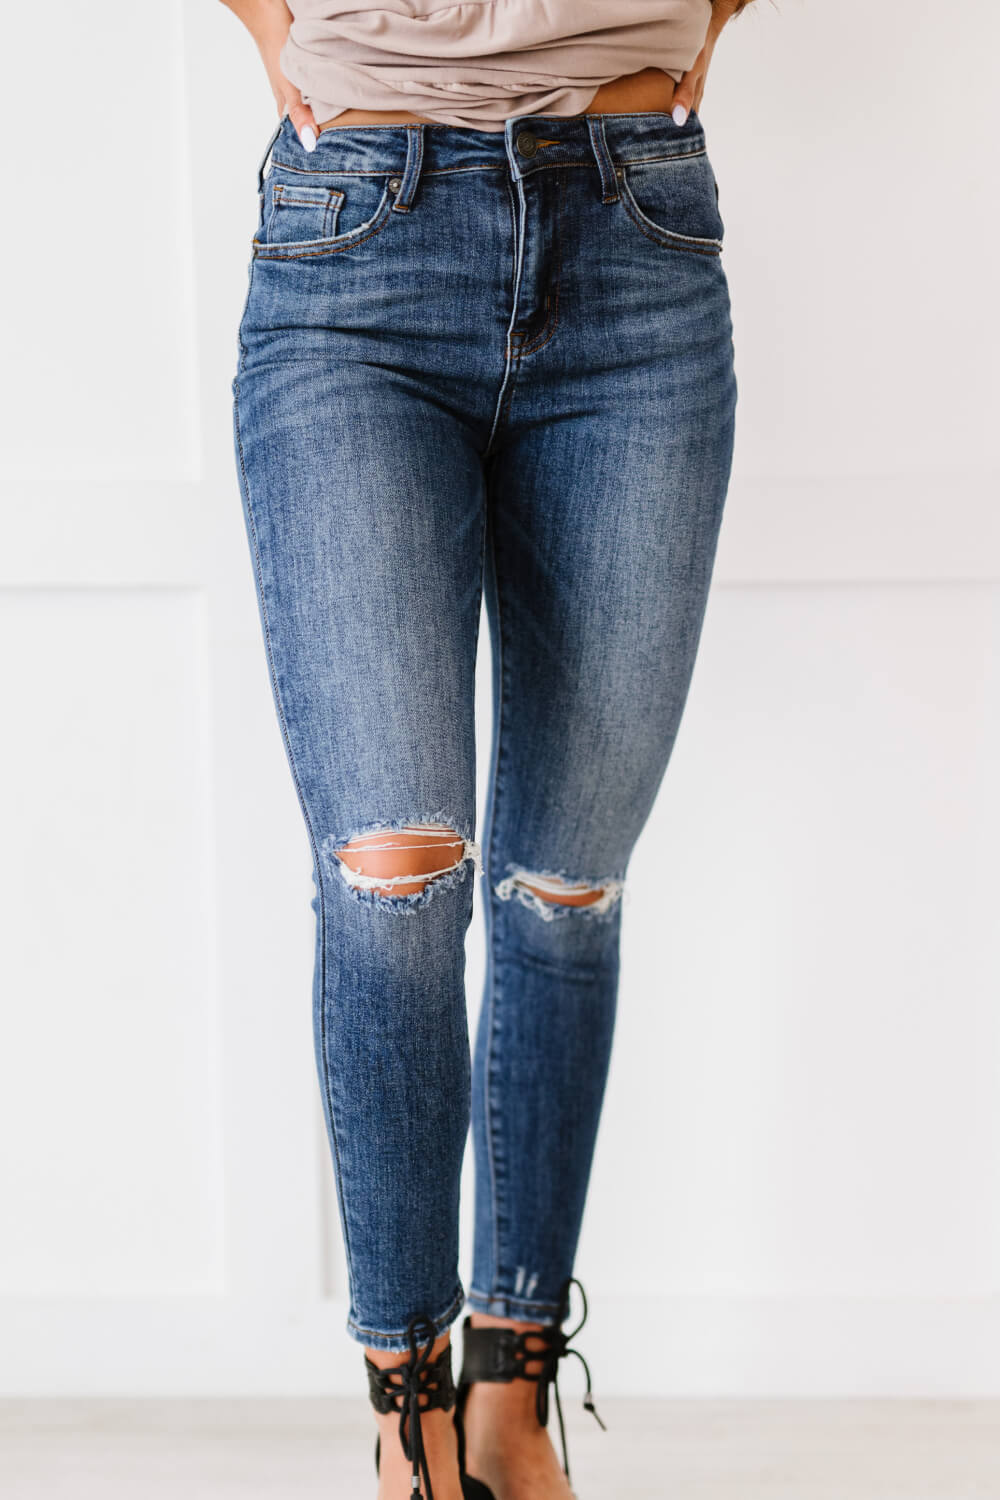 RISEN Amber Full Size Run High-Waisted Distressed Skinny Jeans